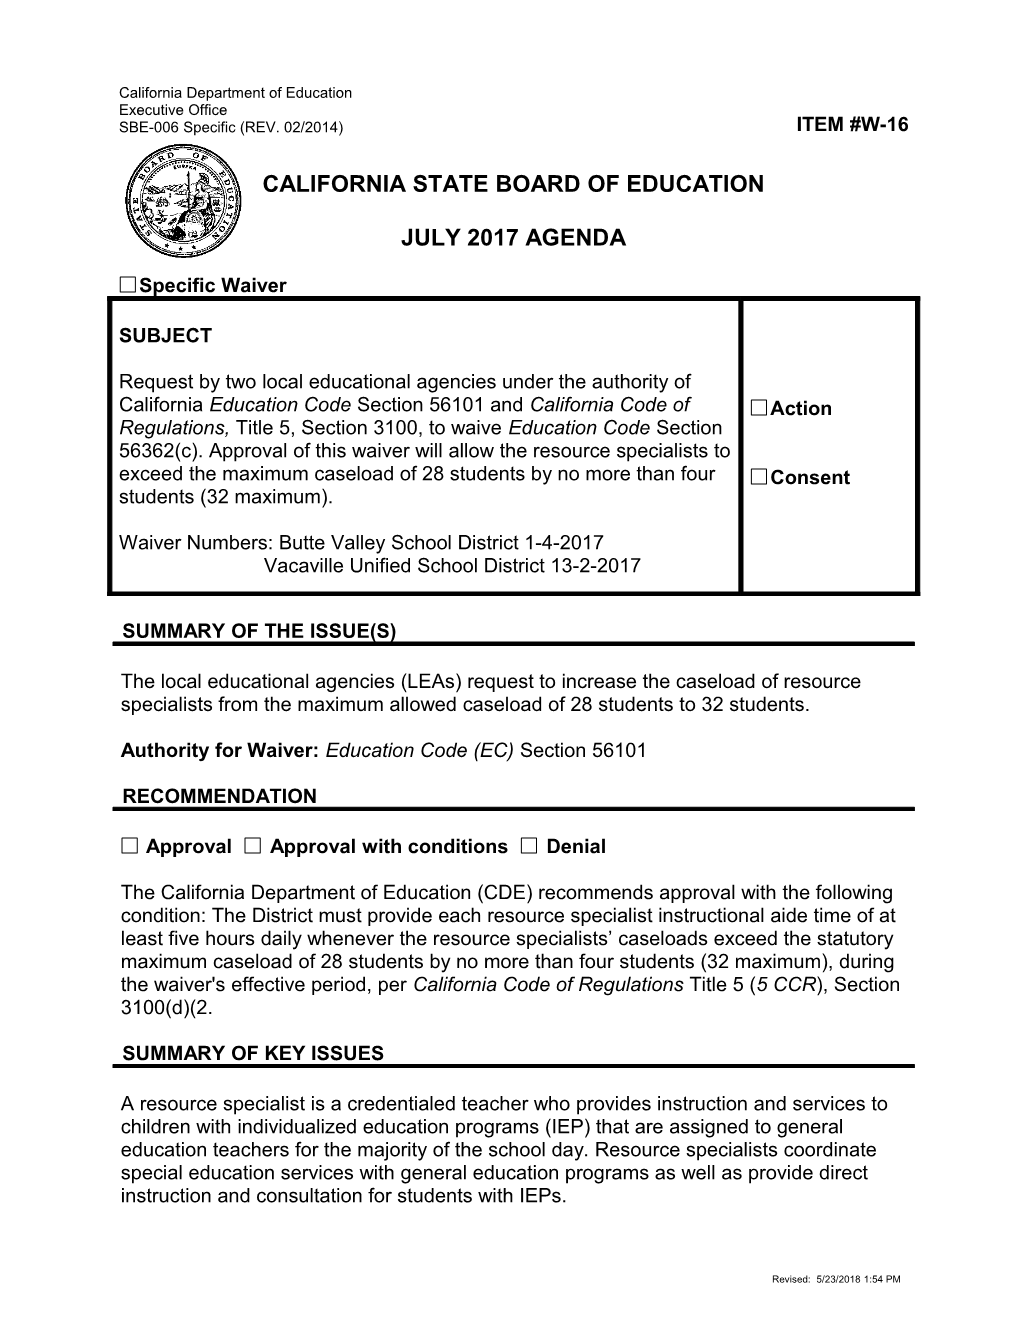 July 2017 Waiver Item W-16 - Meeting Agendas (CA State Board of Education) s1